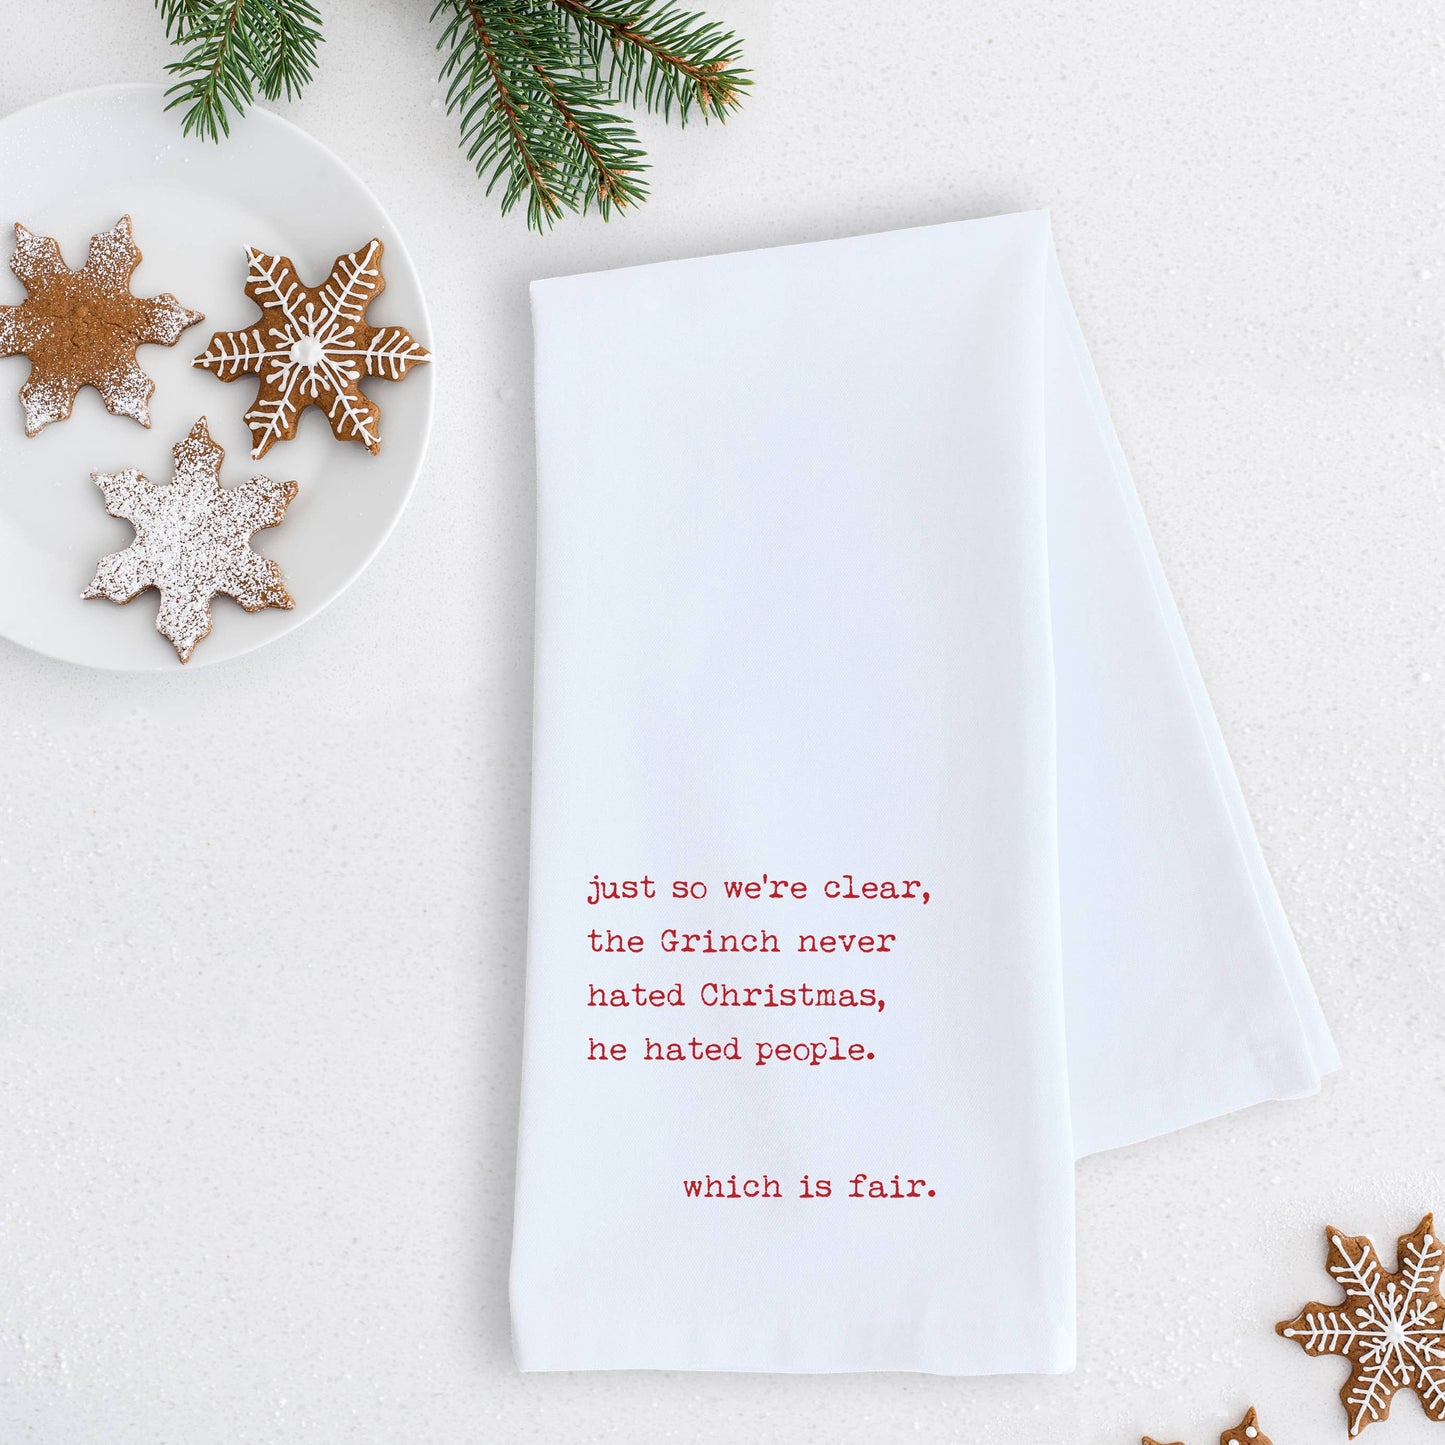 The Grinch Never Hated Christmas - Tea Towel - Holiday